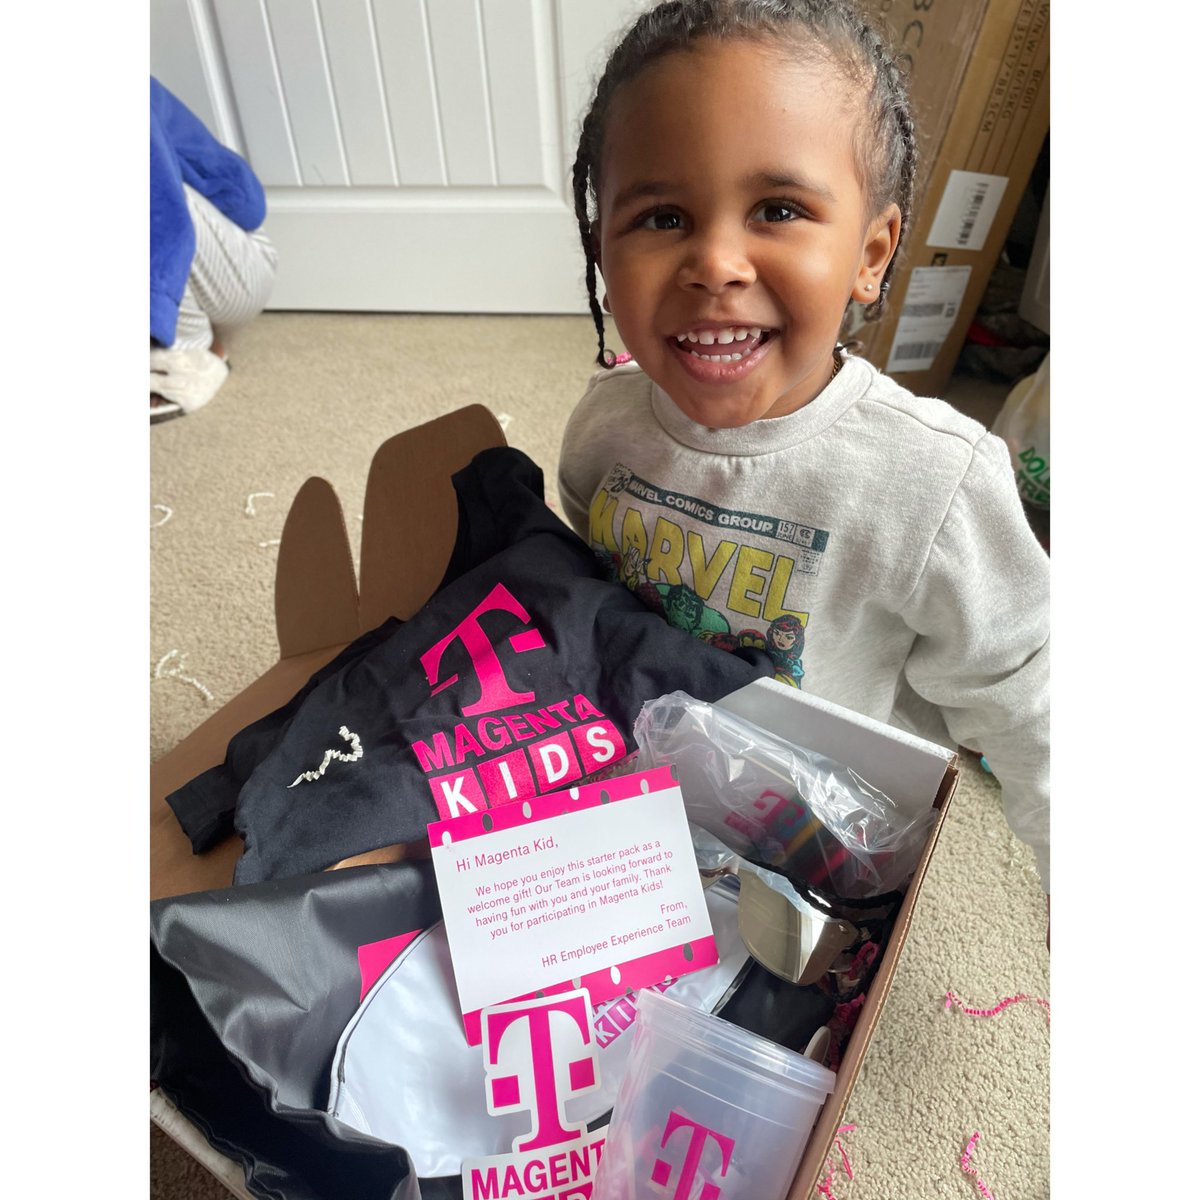 As if I didn't love my job so much  already then today Azeer received this in the mail ! 💕@TMobile #magentakids